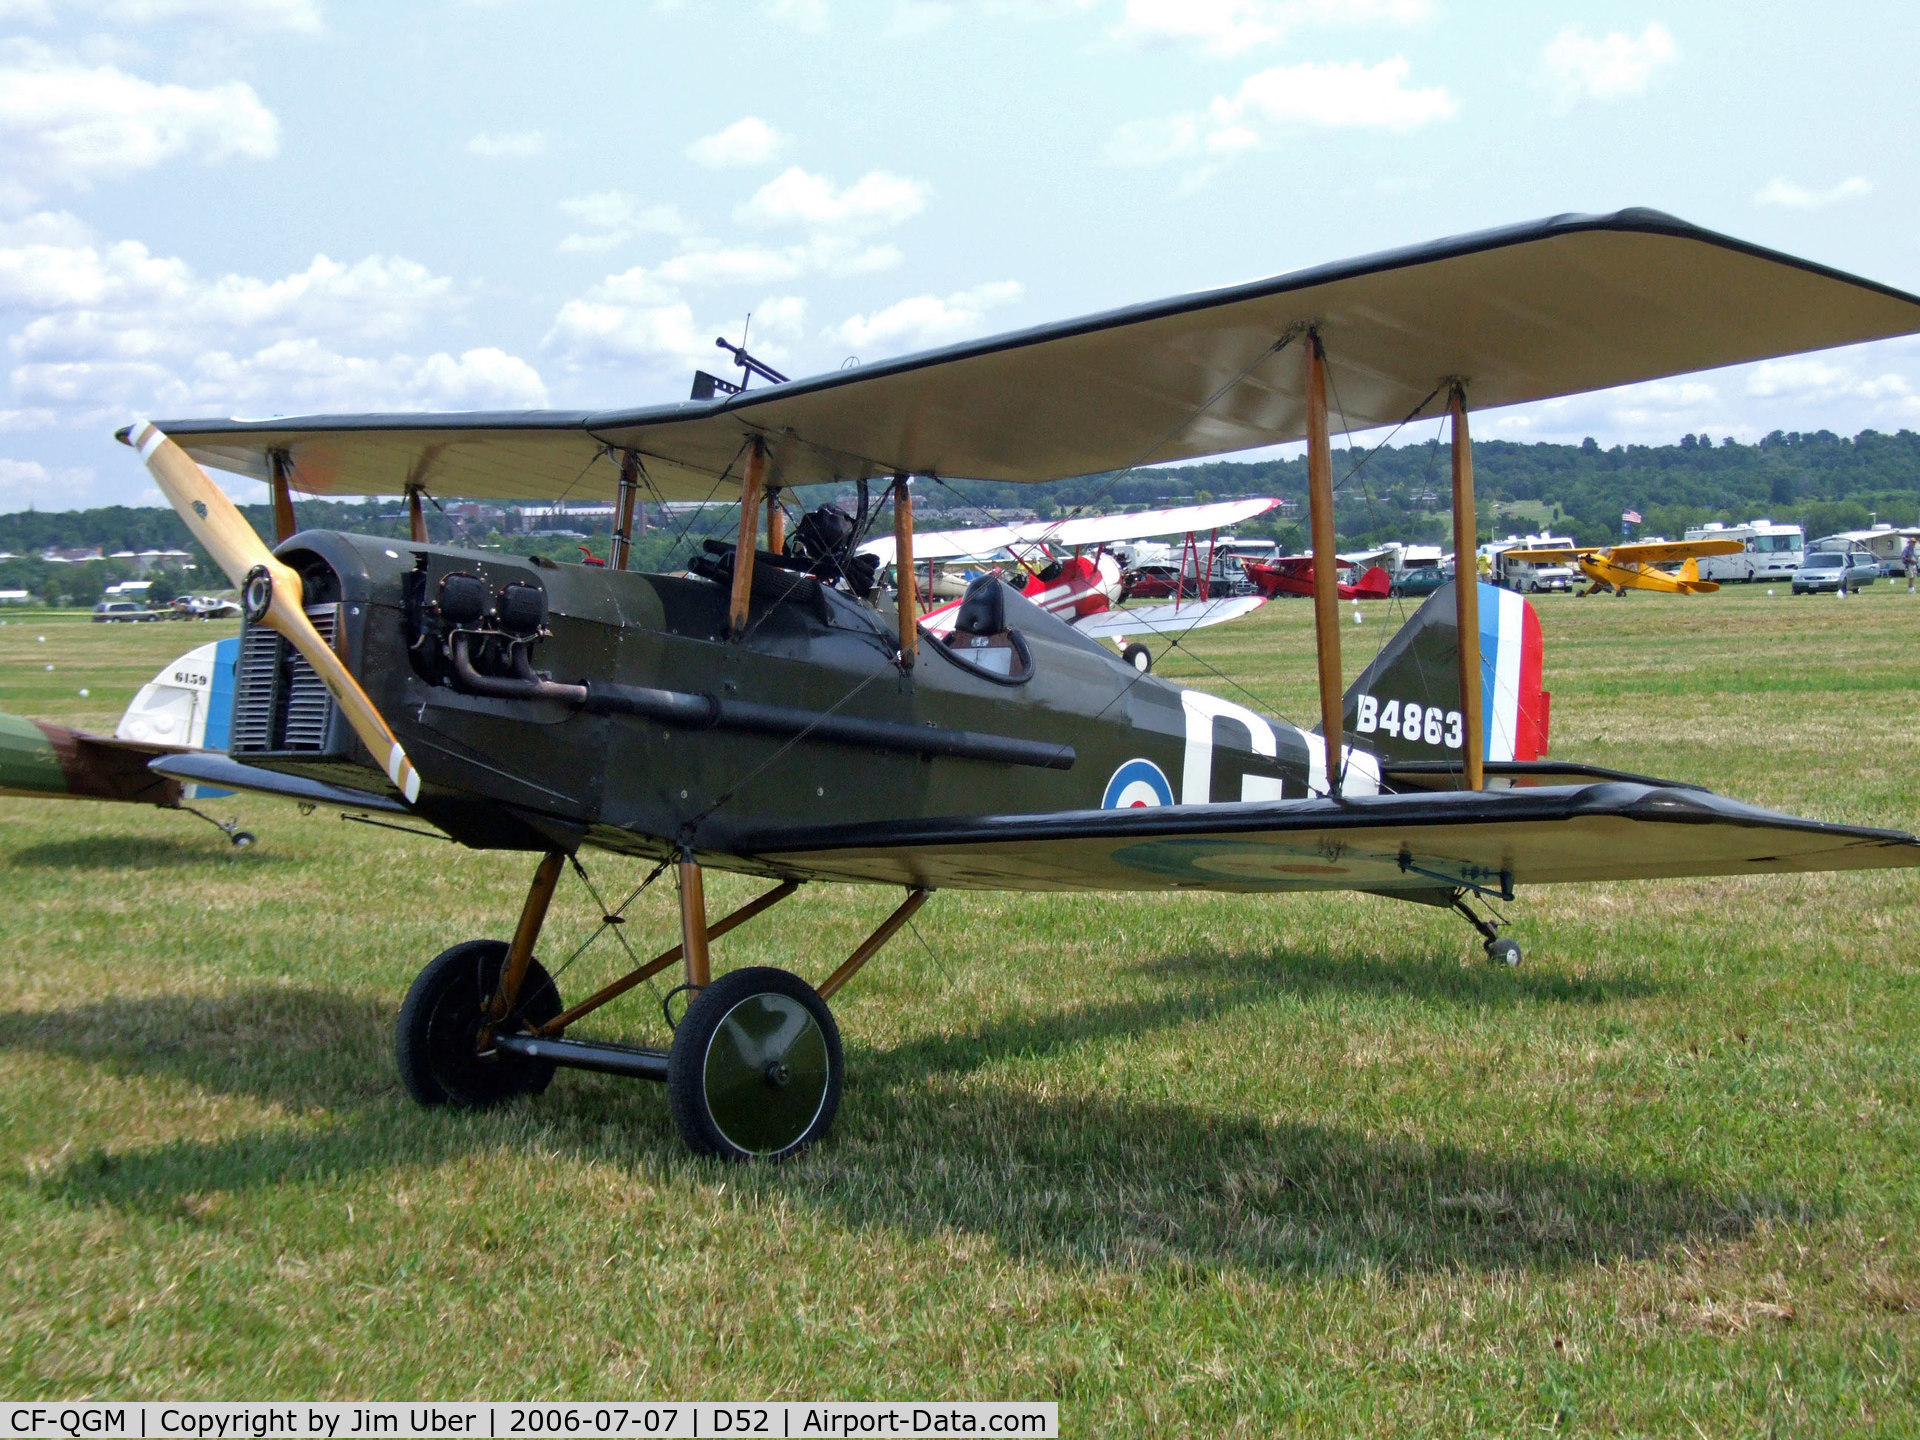 CF-QGM, 1970 Royal Aircraft Factory SE-5A Replica C/N G70 003, another SE-5 replica at Geneseo